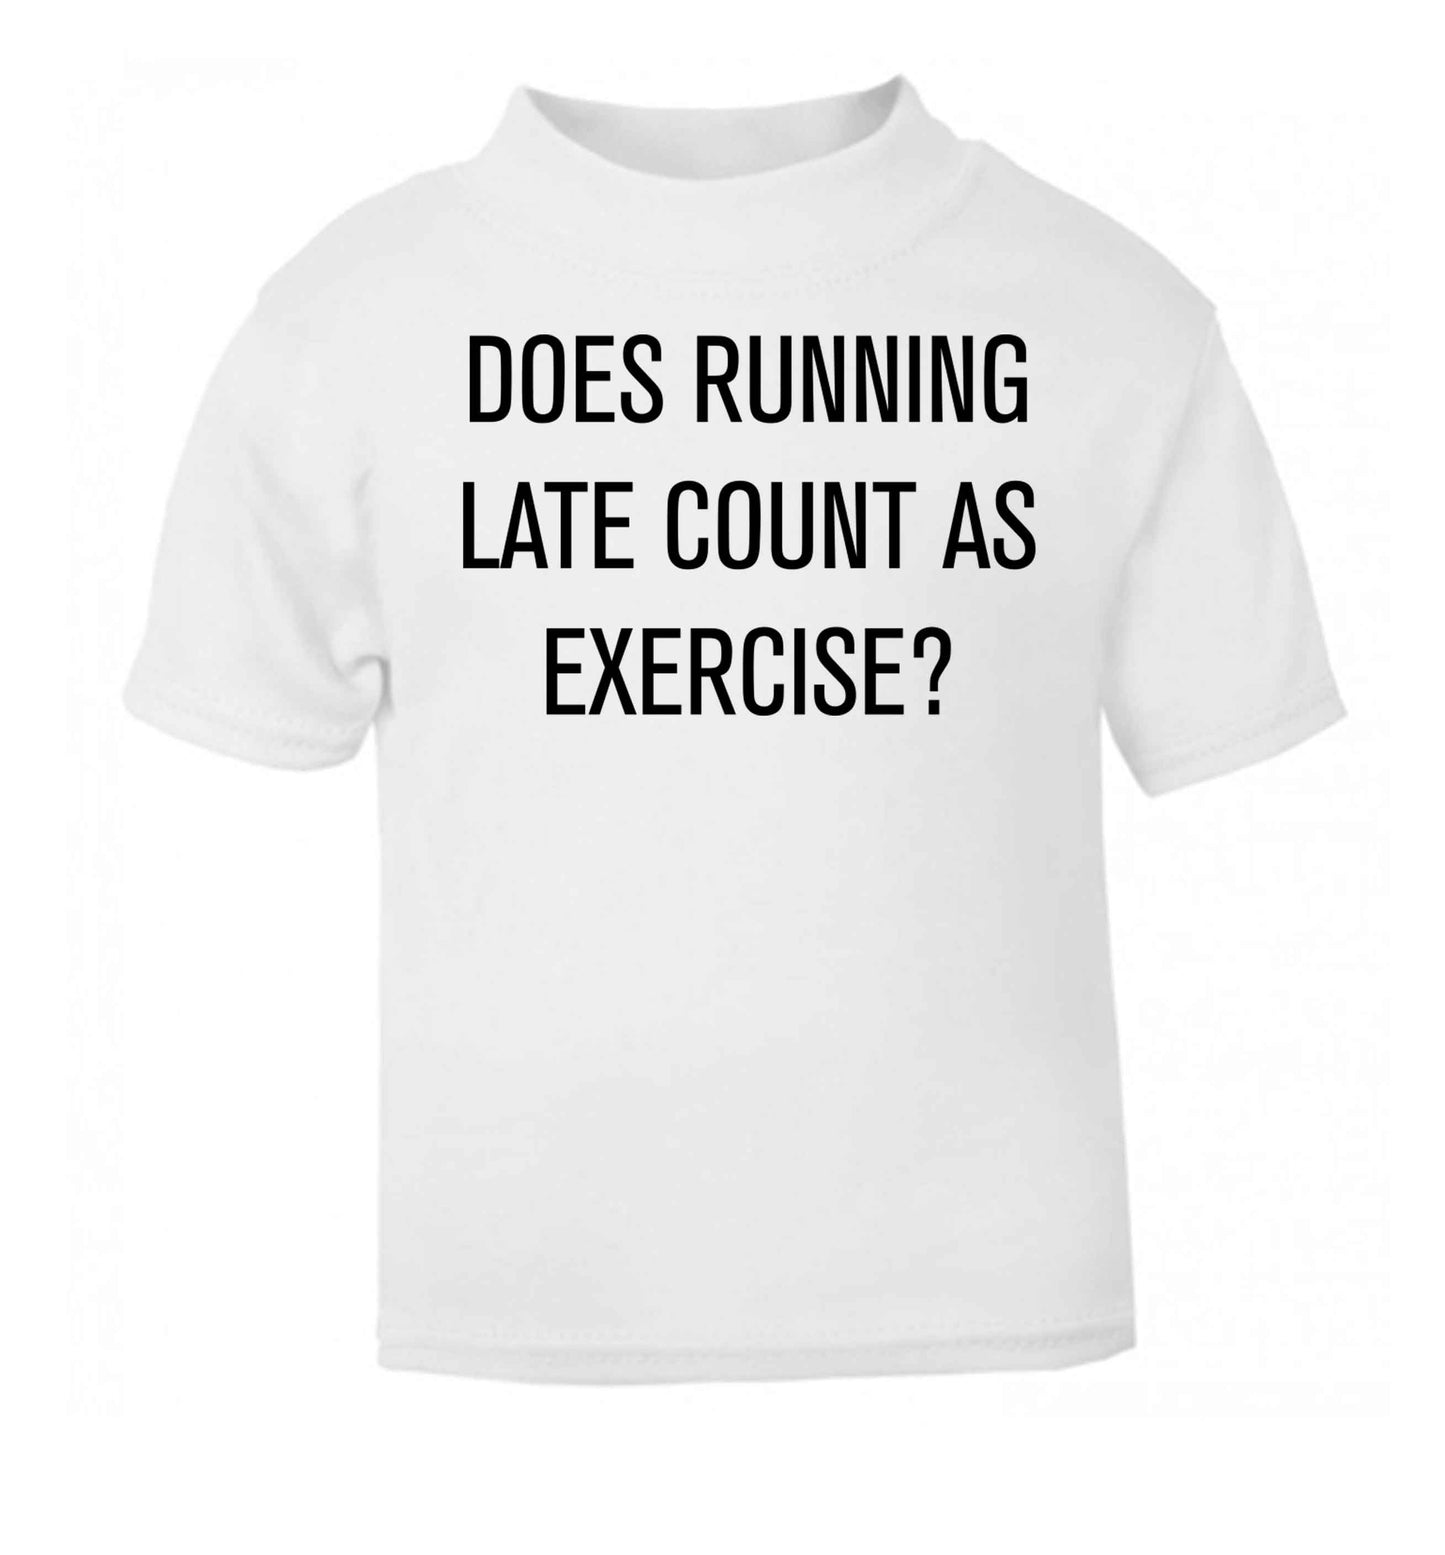 Does running late count as exercise? white baby toddler Tshirt 2 Years